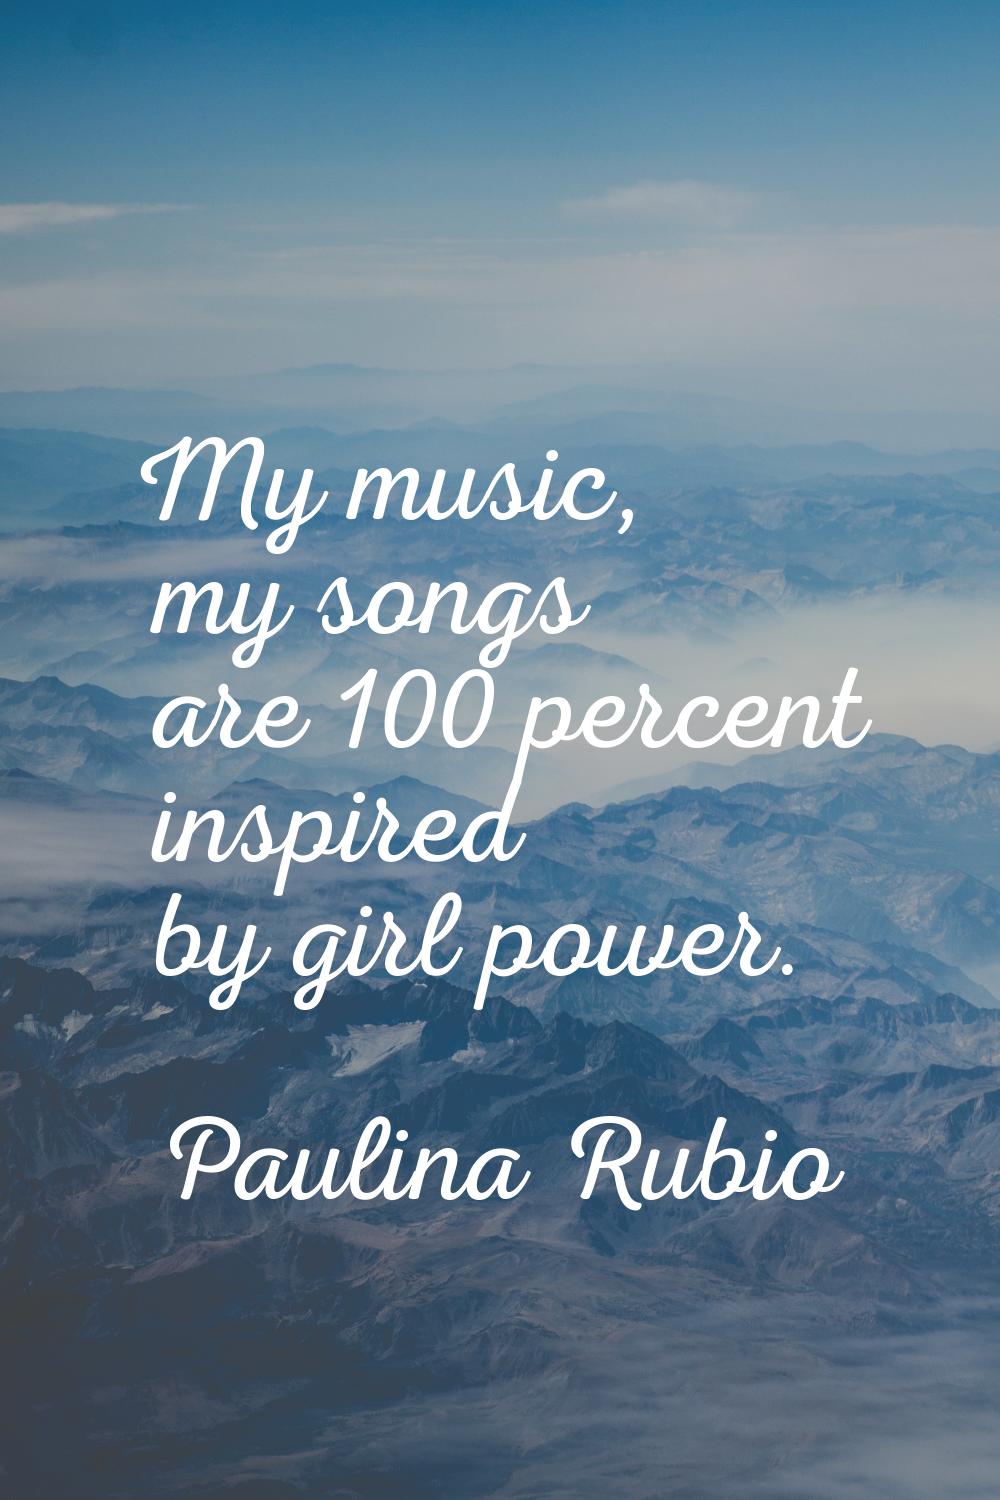 My music, my songs are 100 percent inspired by girl power.